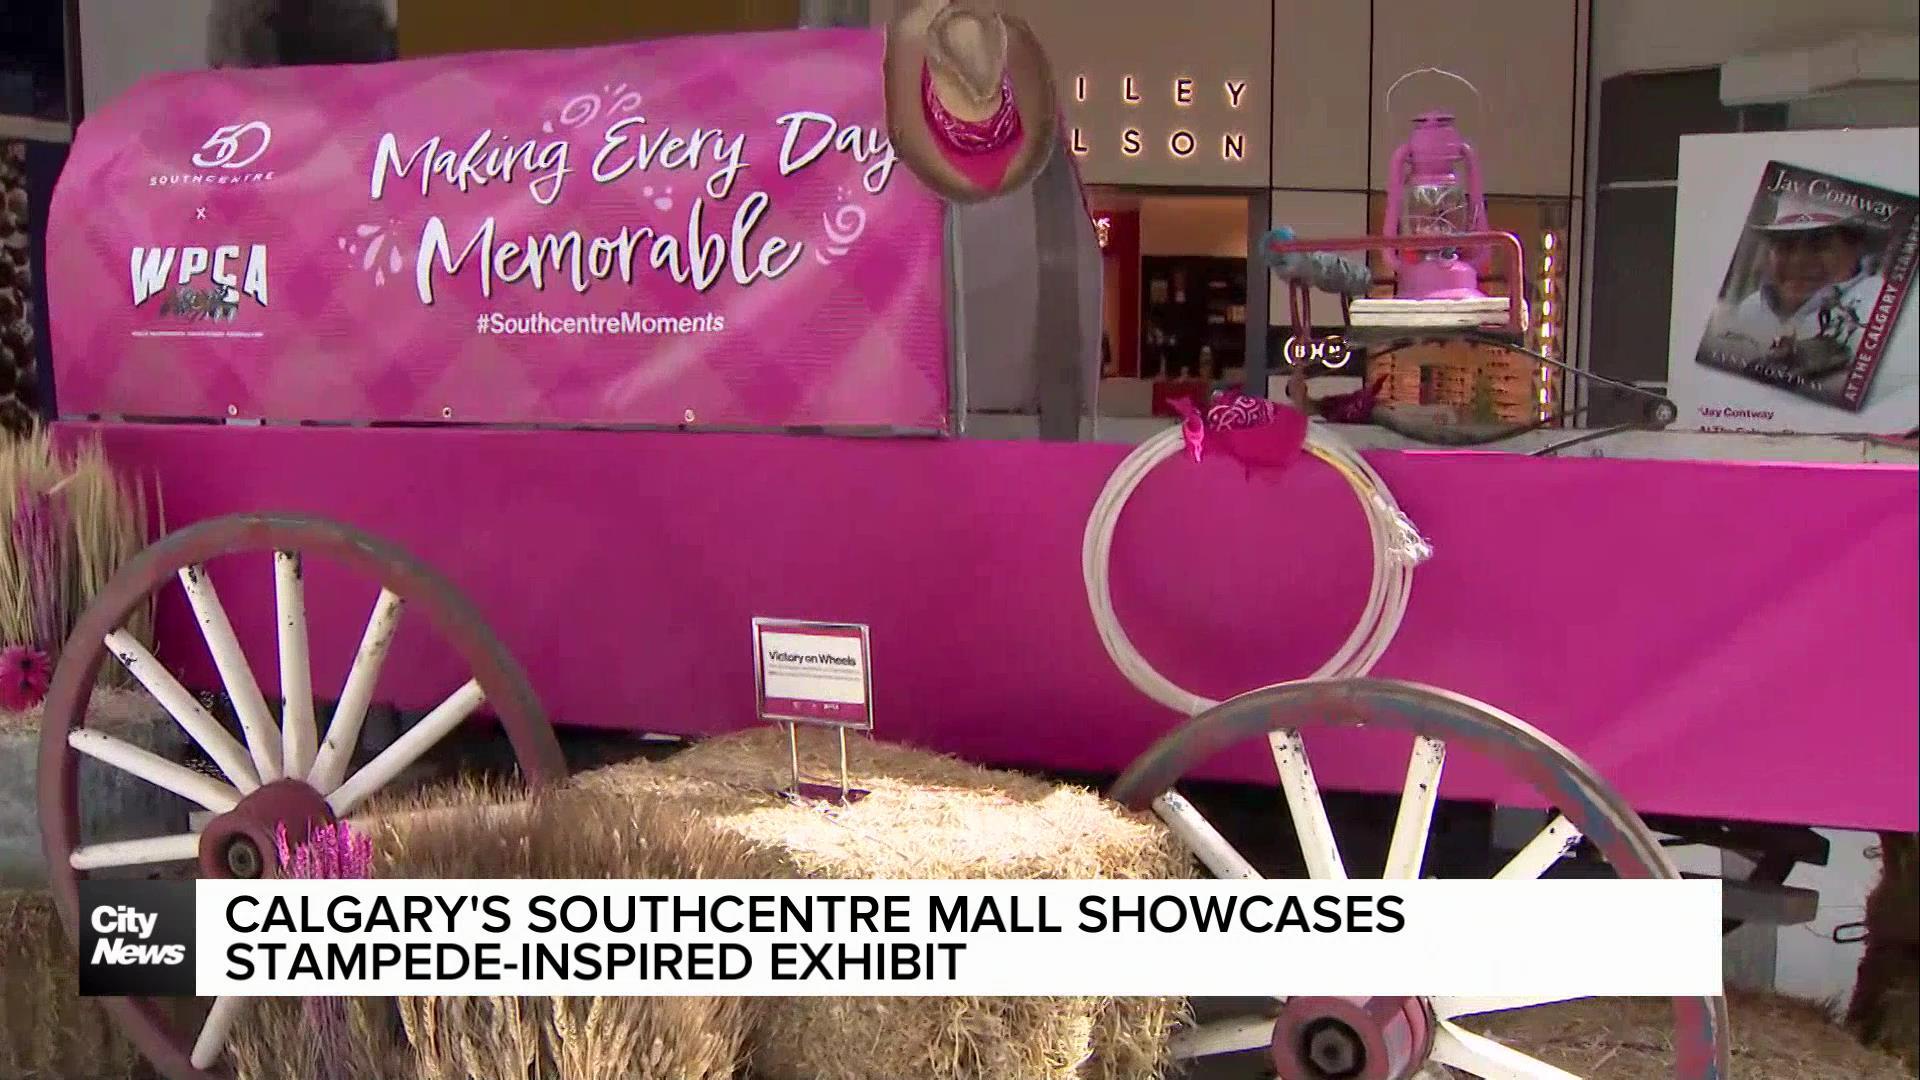 Calgary's Southcentre Mall showcases Stampede-inspired exhibit